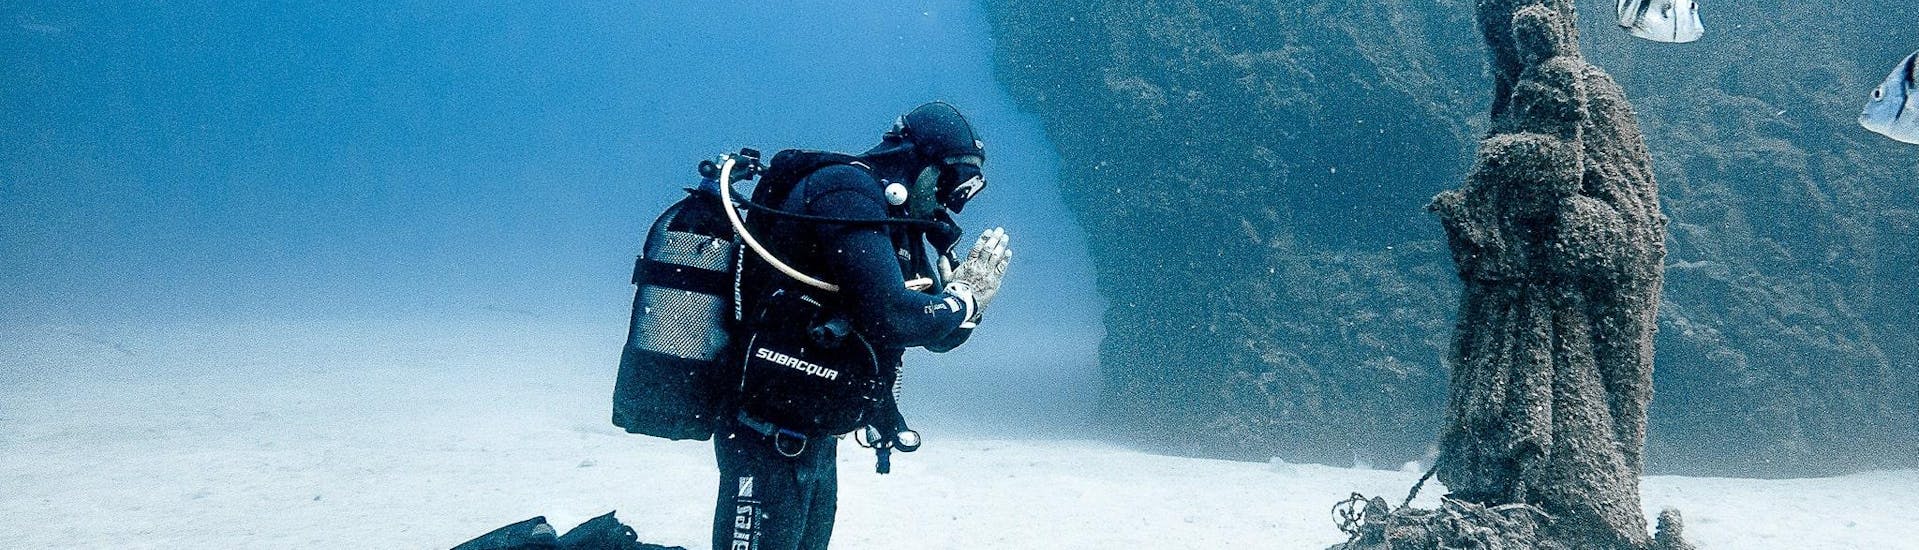 Blue Bottom Diving - All You Need to Know BEFORE You Go (with Photos)